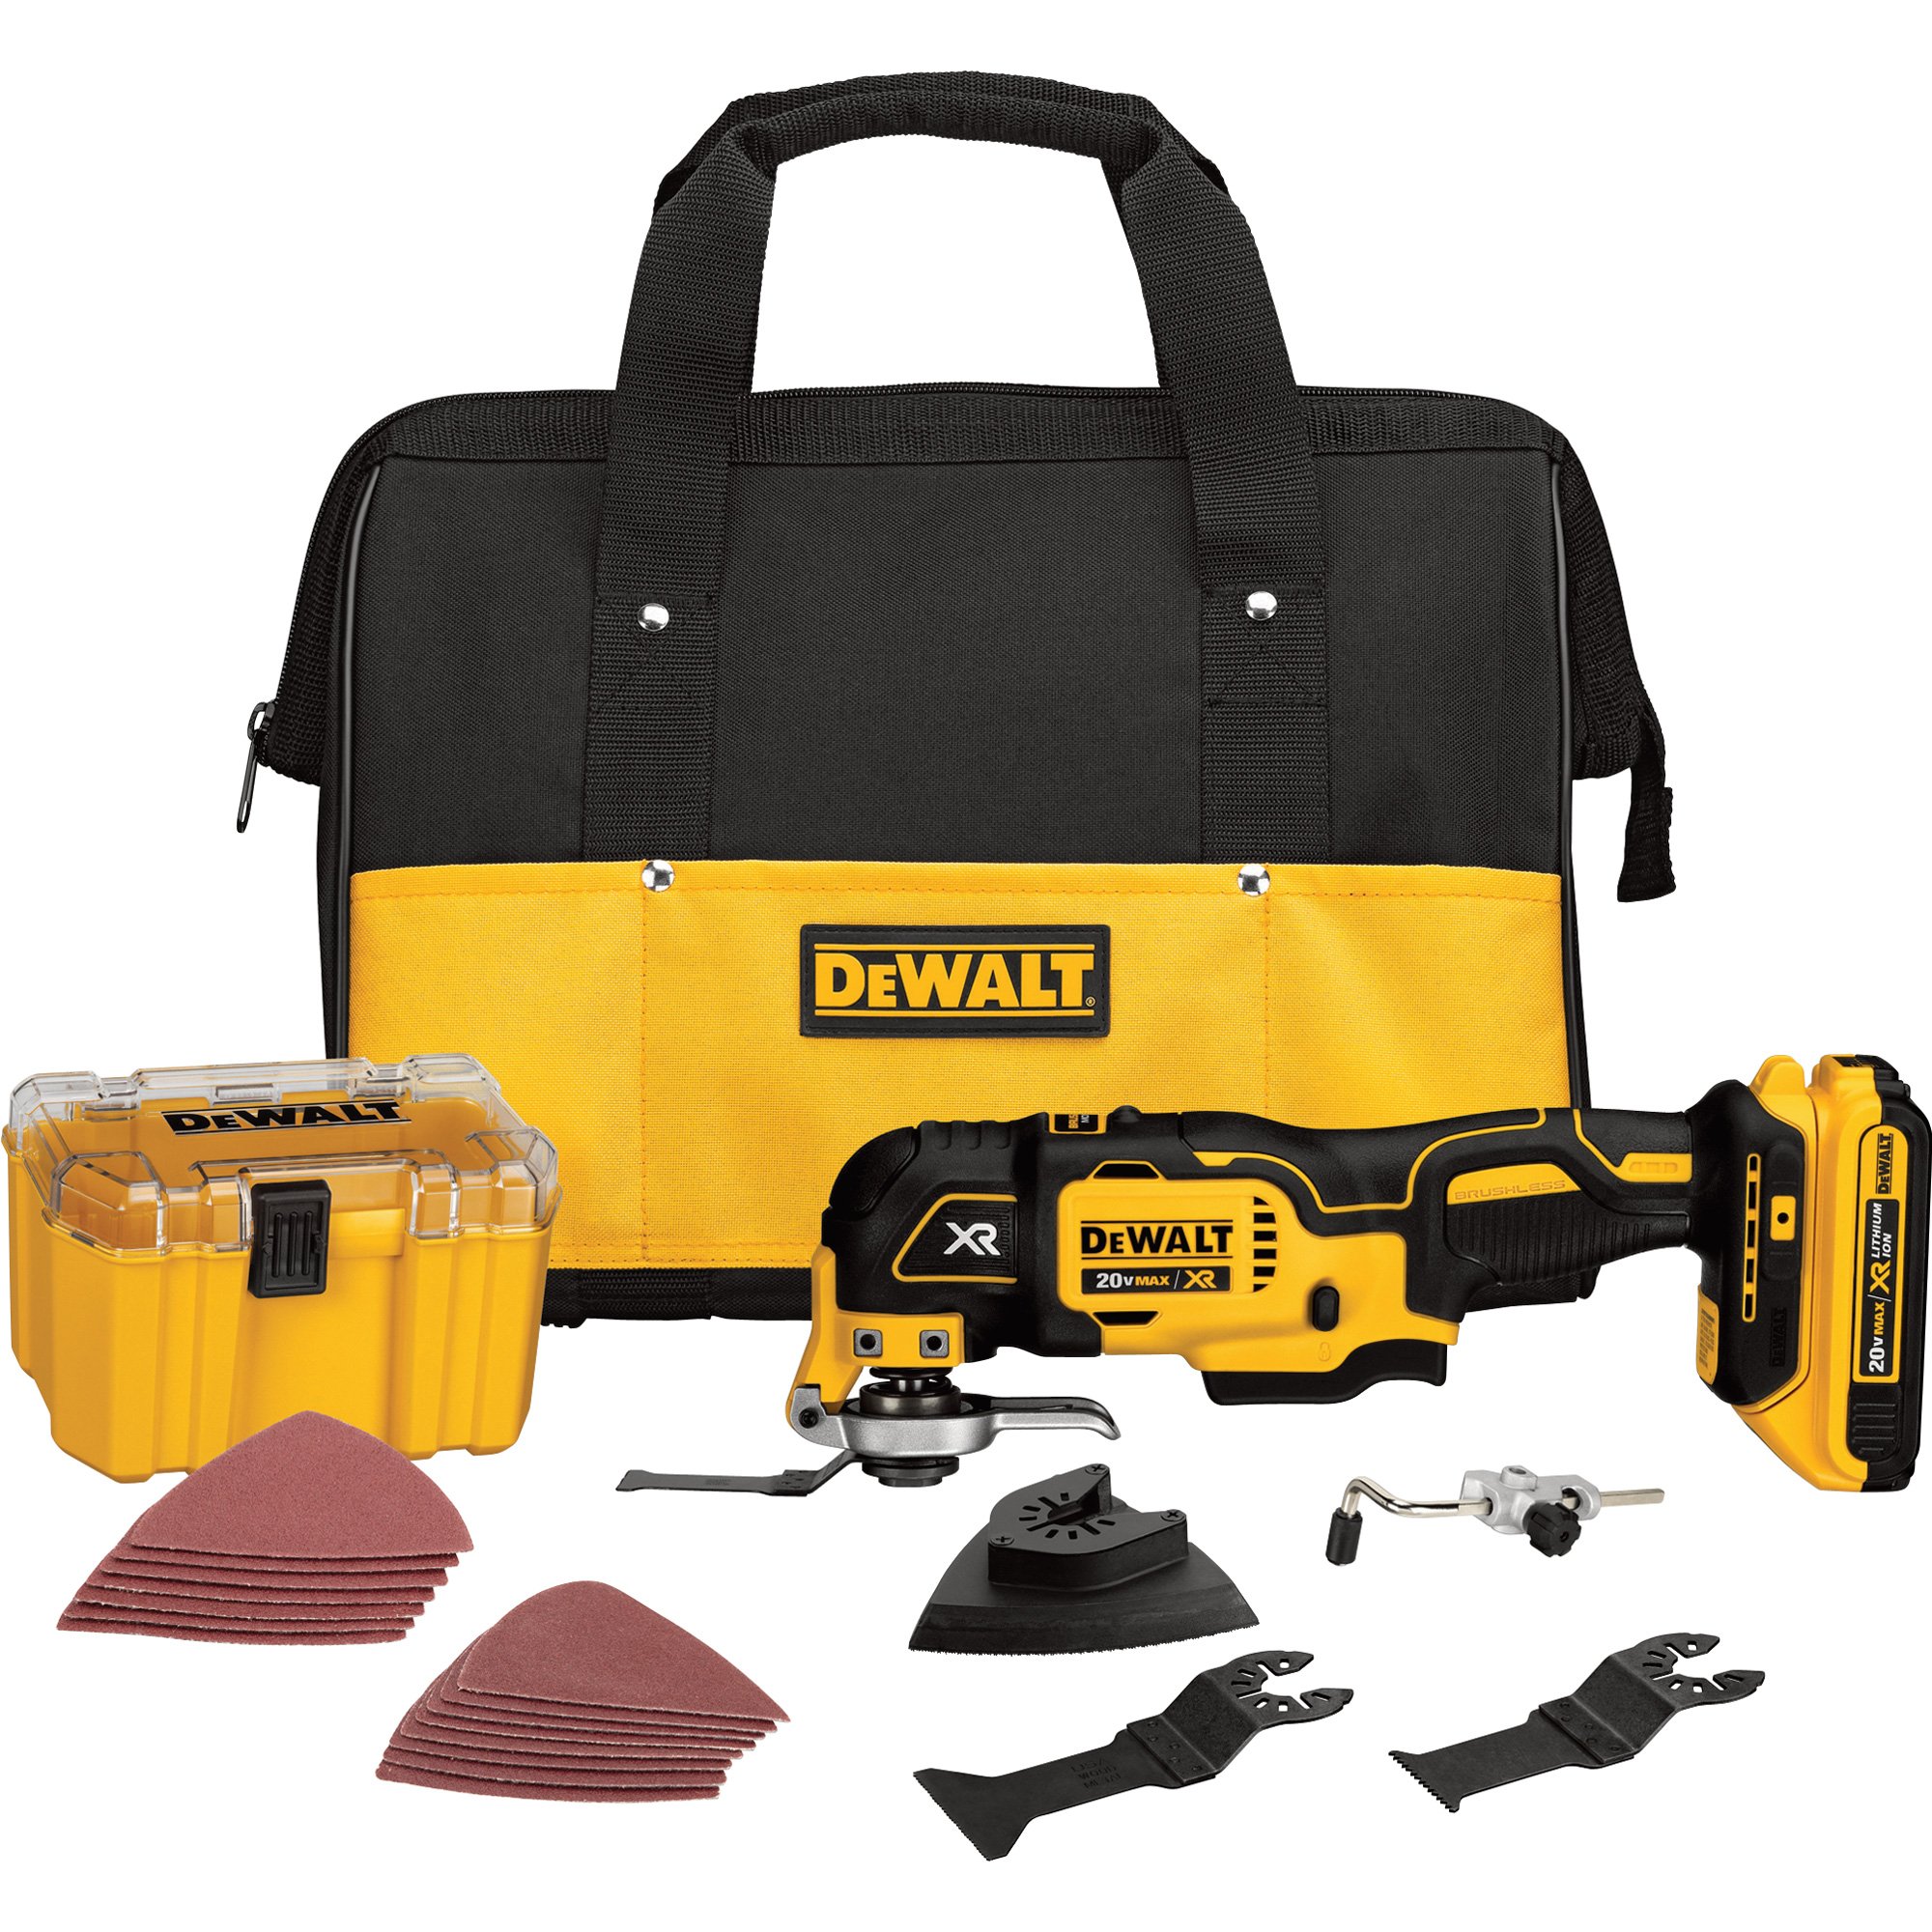 Cordless Oscillating Tool for Dewalt 20V Battery, 6 Variable Speed  Brushless-Motor Tool, Oscillating Multi Tool Kit for Cutting Wood Drywall  Nails Remove Grout & Sanding(Battery Not Included) 